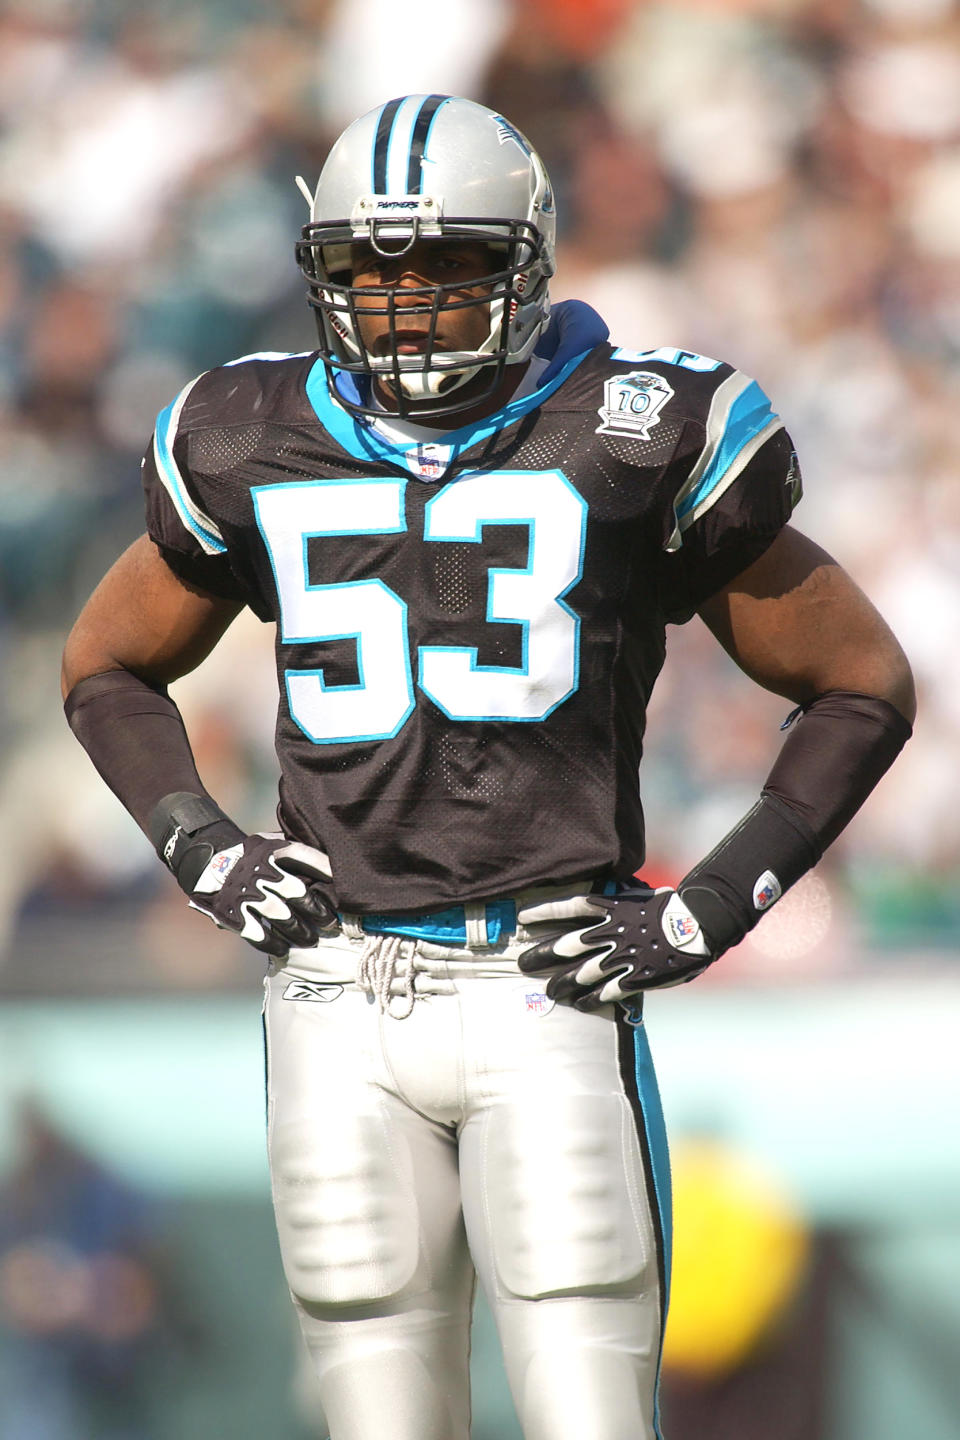 Brandon Short of the Carolina Panthers looks on during a NFL football game against the Philadelphia Eagles on Oct. 17, 2004, in Philadelphia. (Mitchell Layton / Getty Images file)